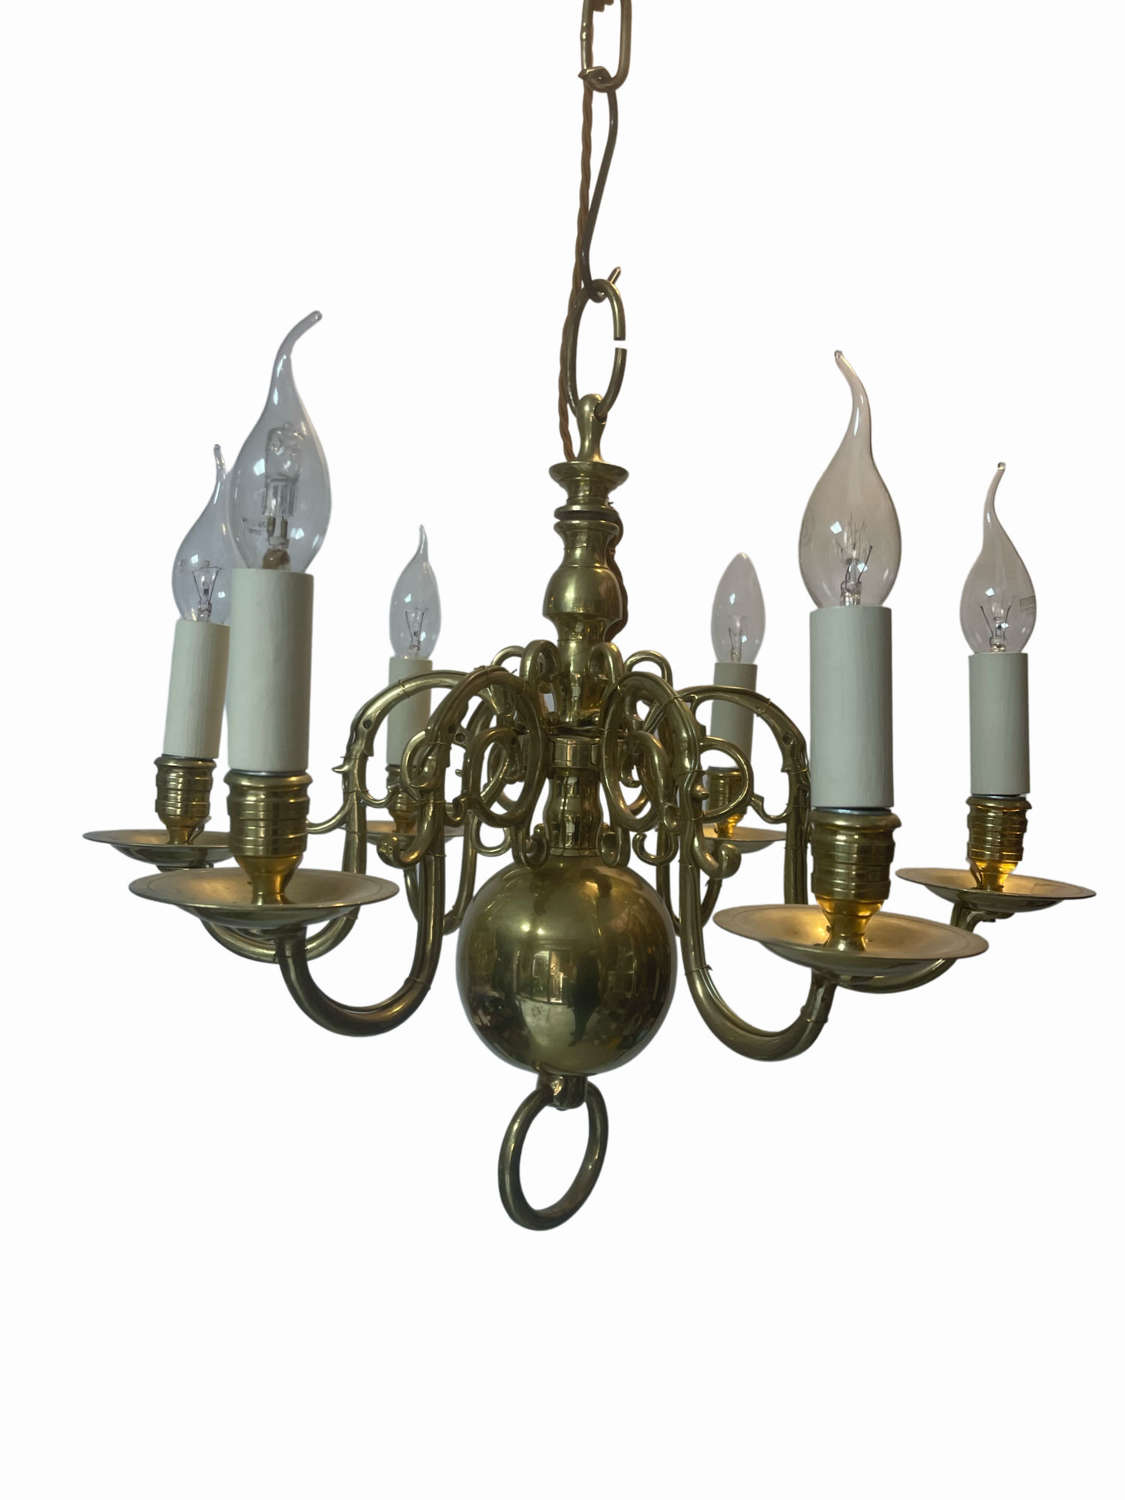 A small 18th century style dutch chandelier